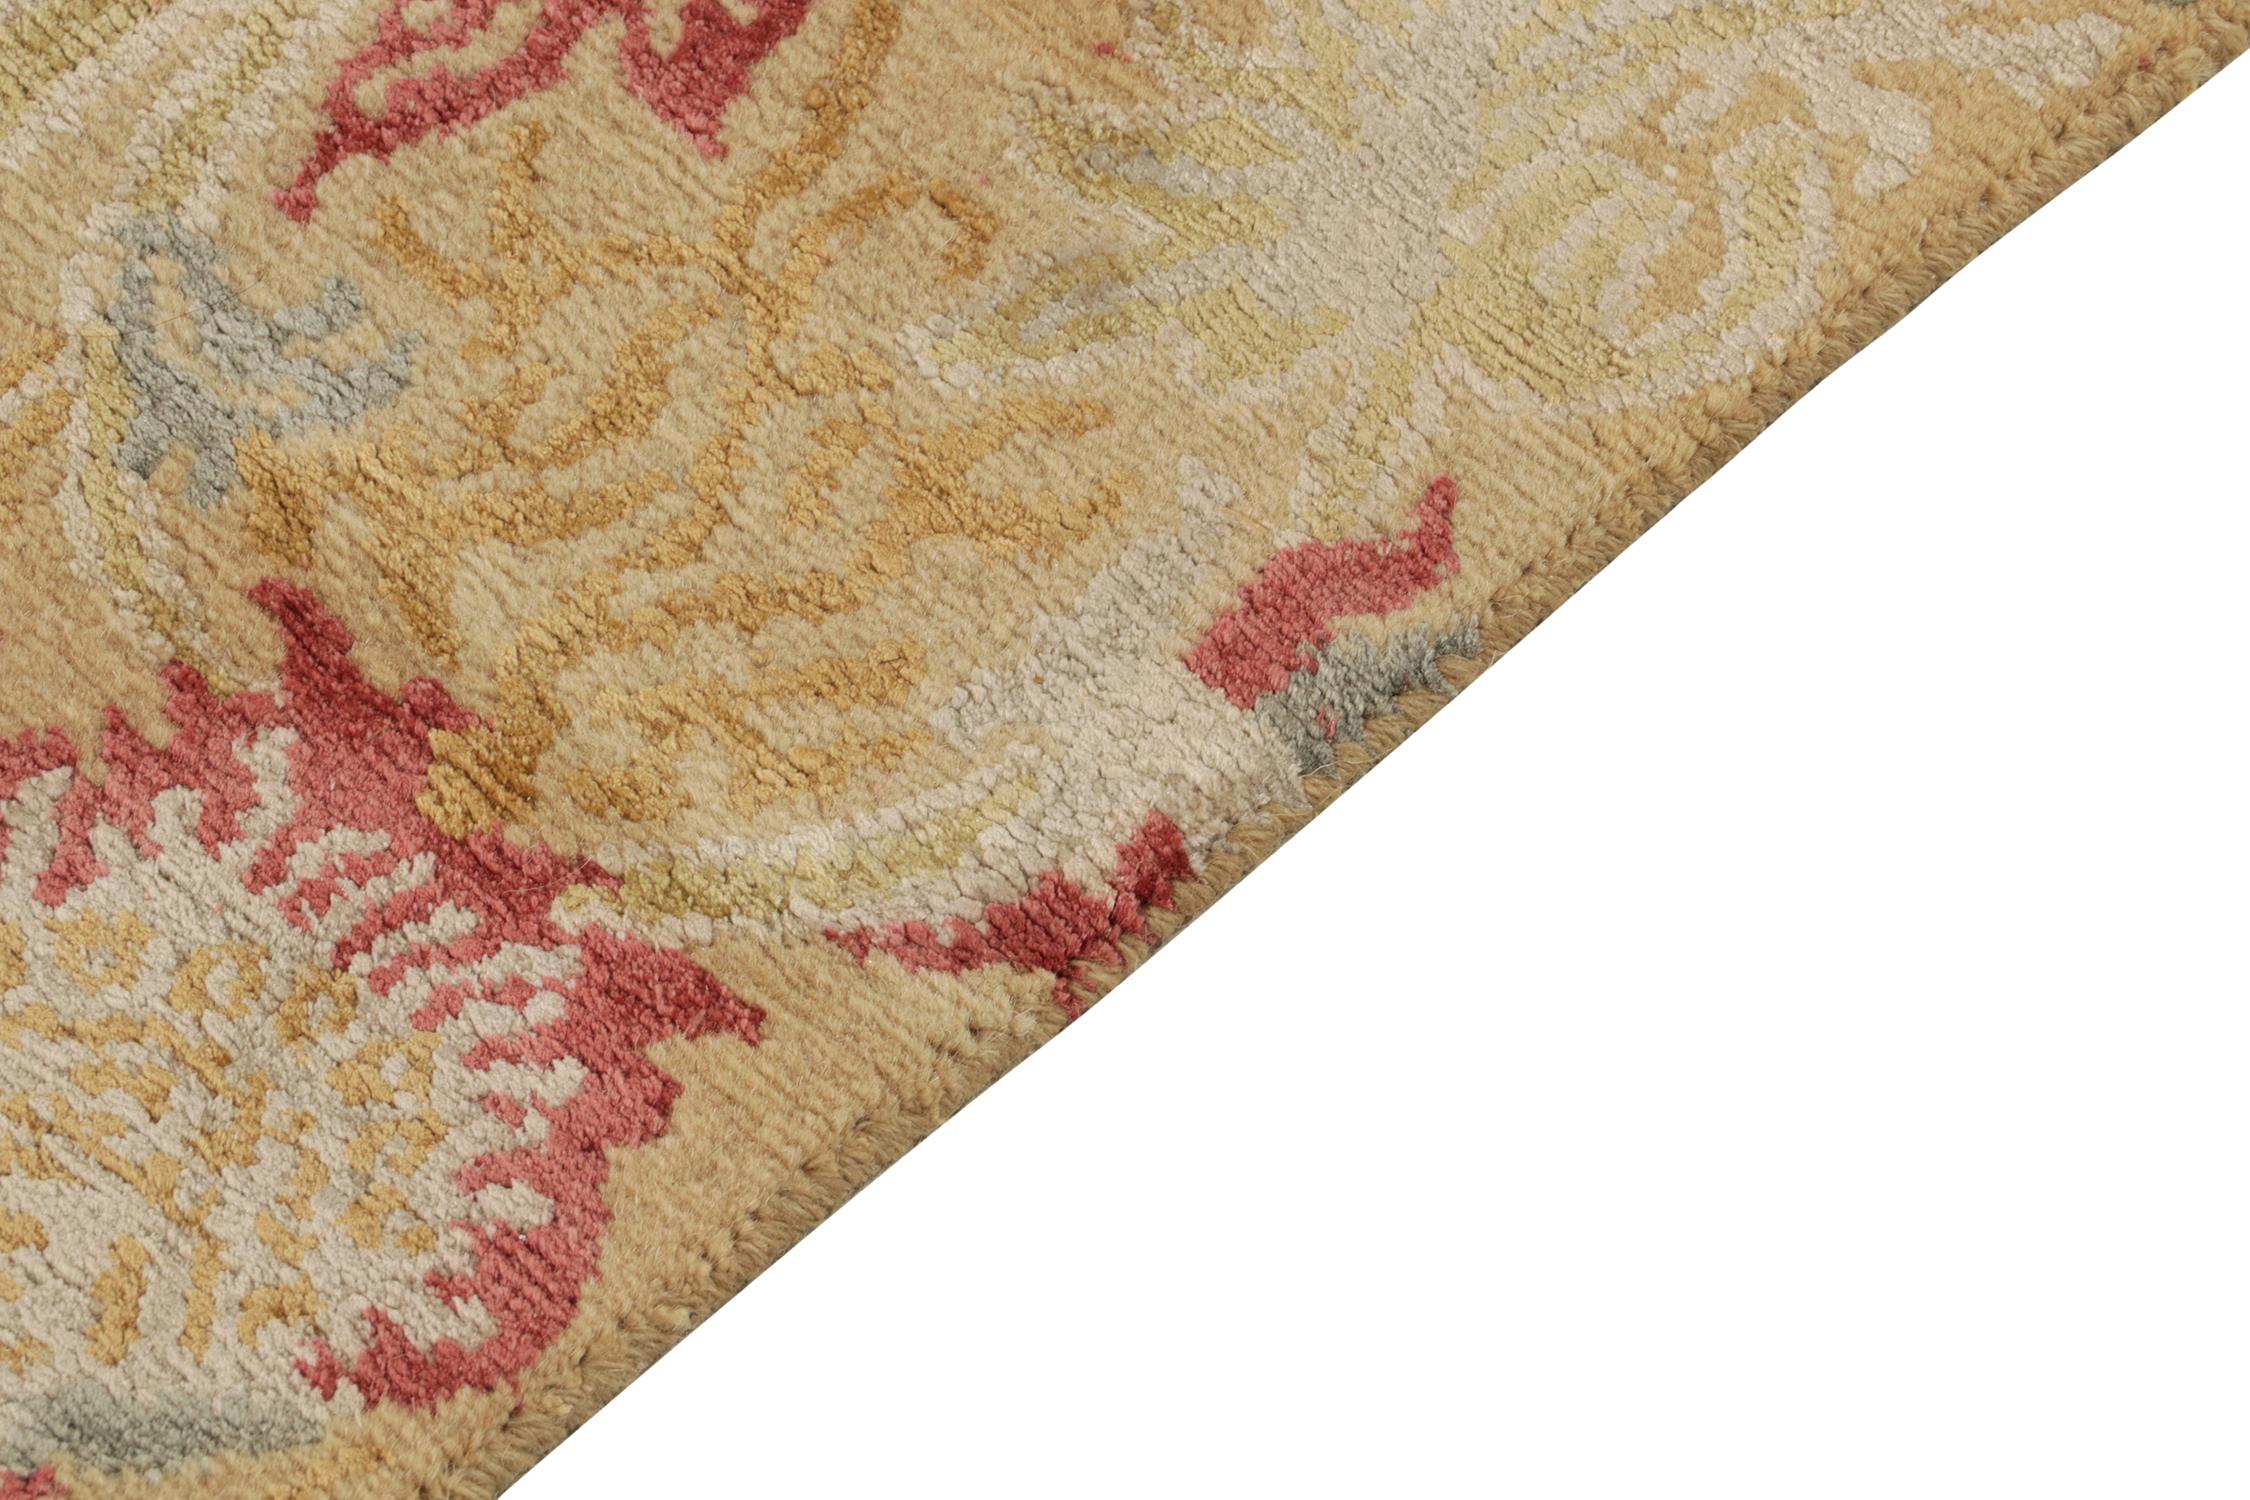 Hand-Knotted Rug & Kilim's Spanish European Style Runner in Gold, Red & Gray Floral Pattern For Sale